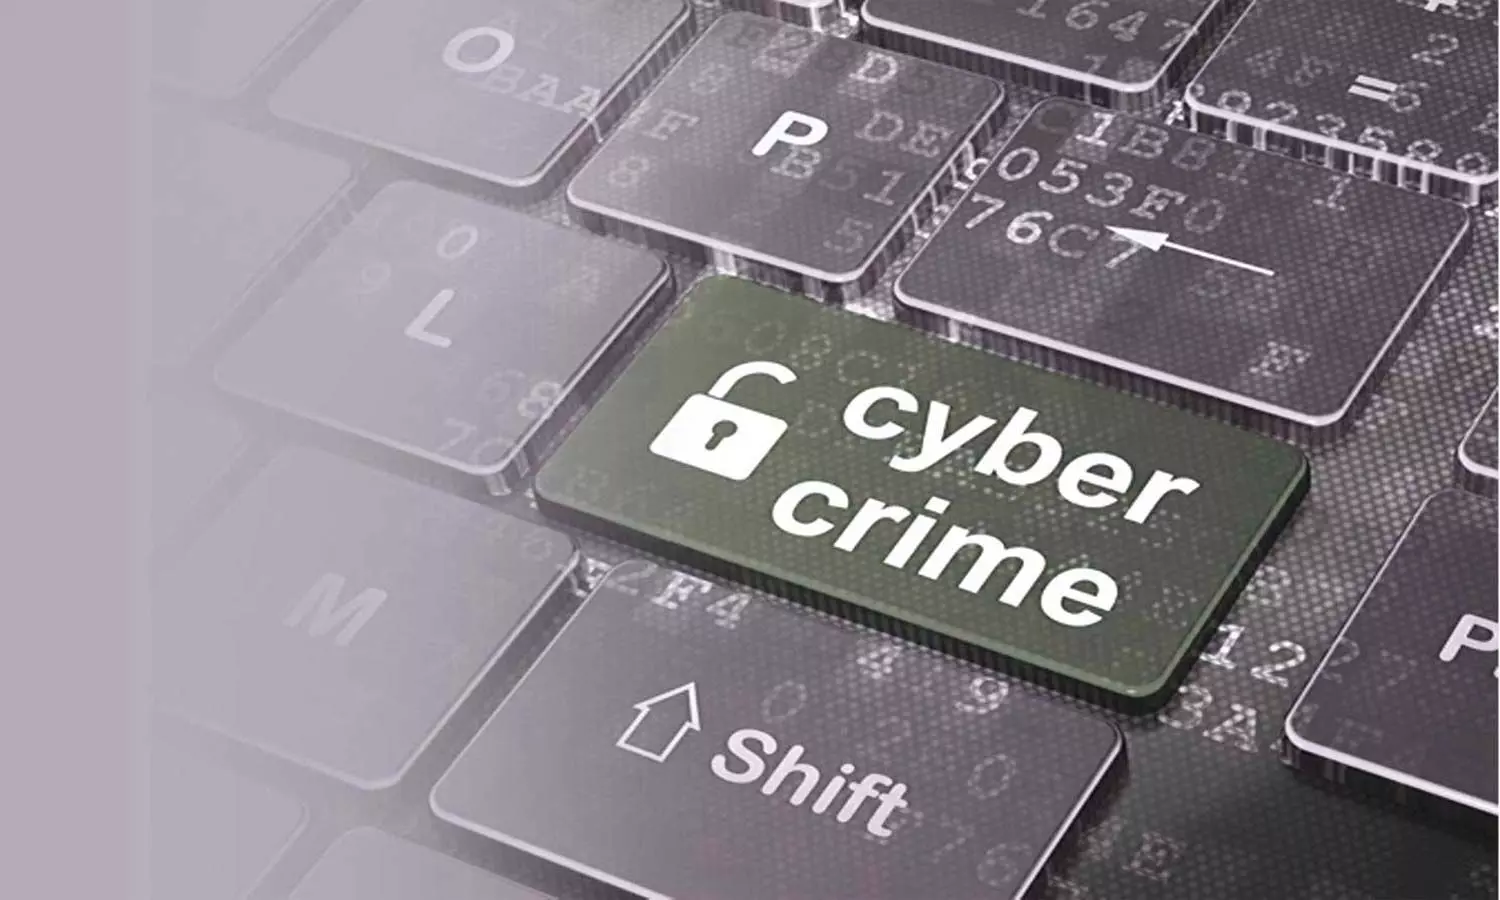 Odisha: Retired Doctor duped of Rs 77 lakh by cybercriminals